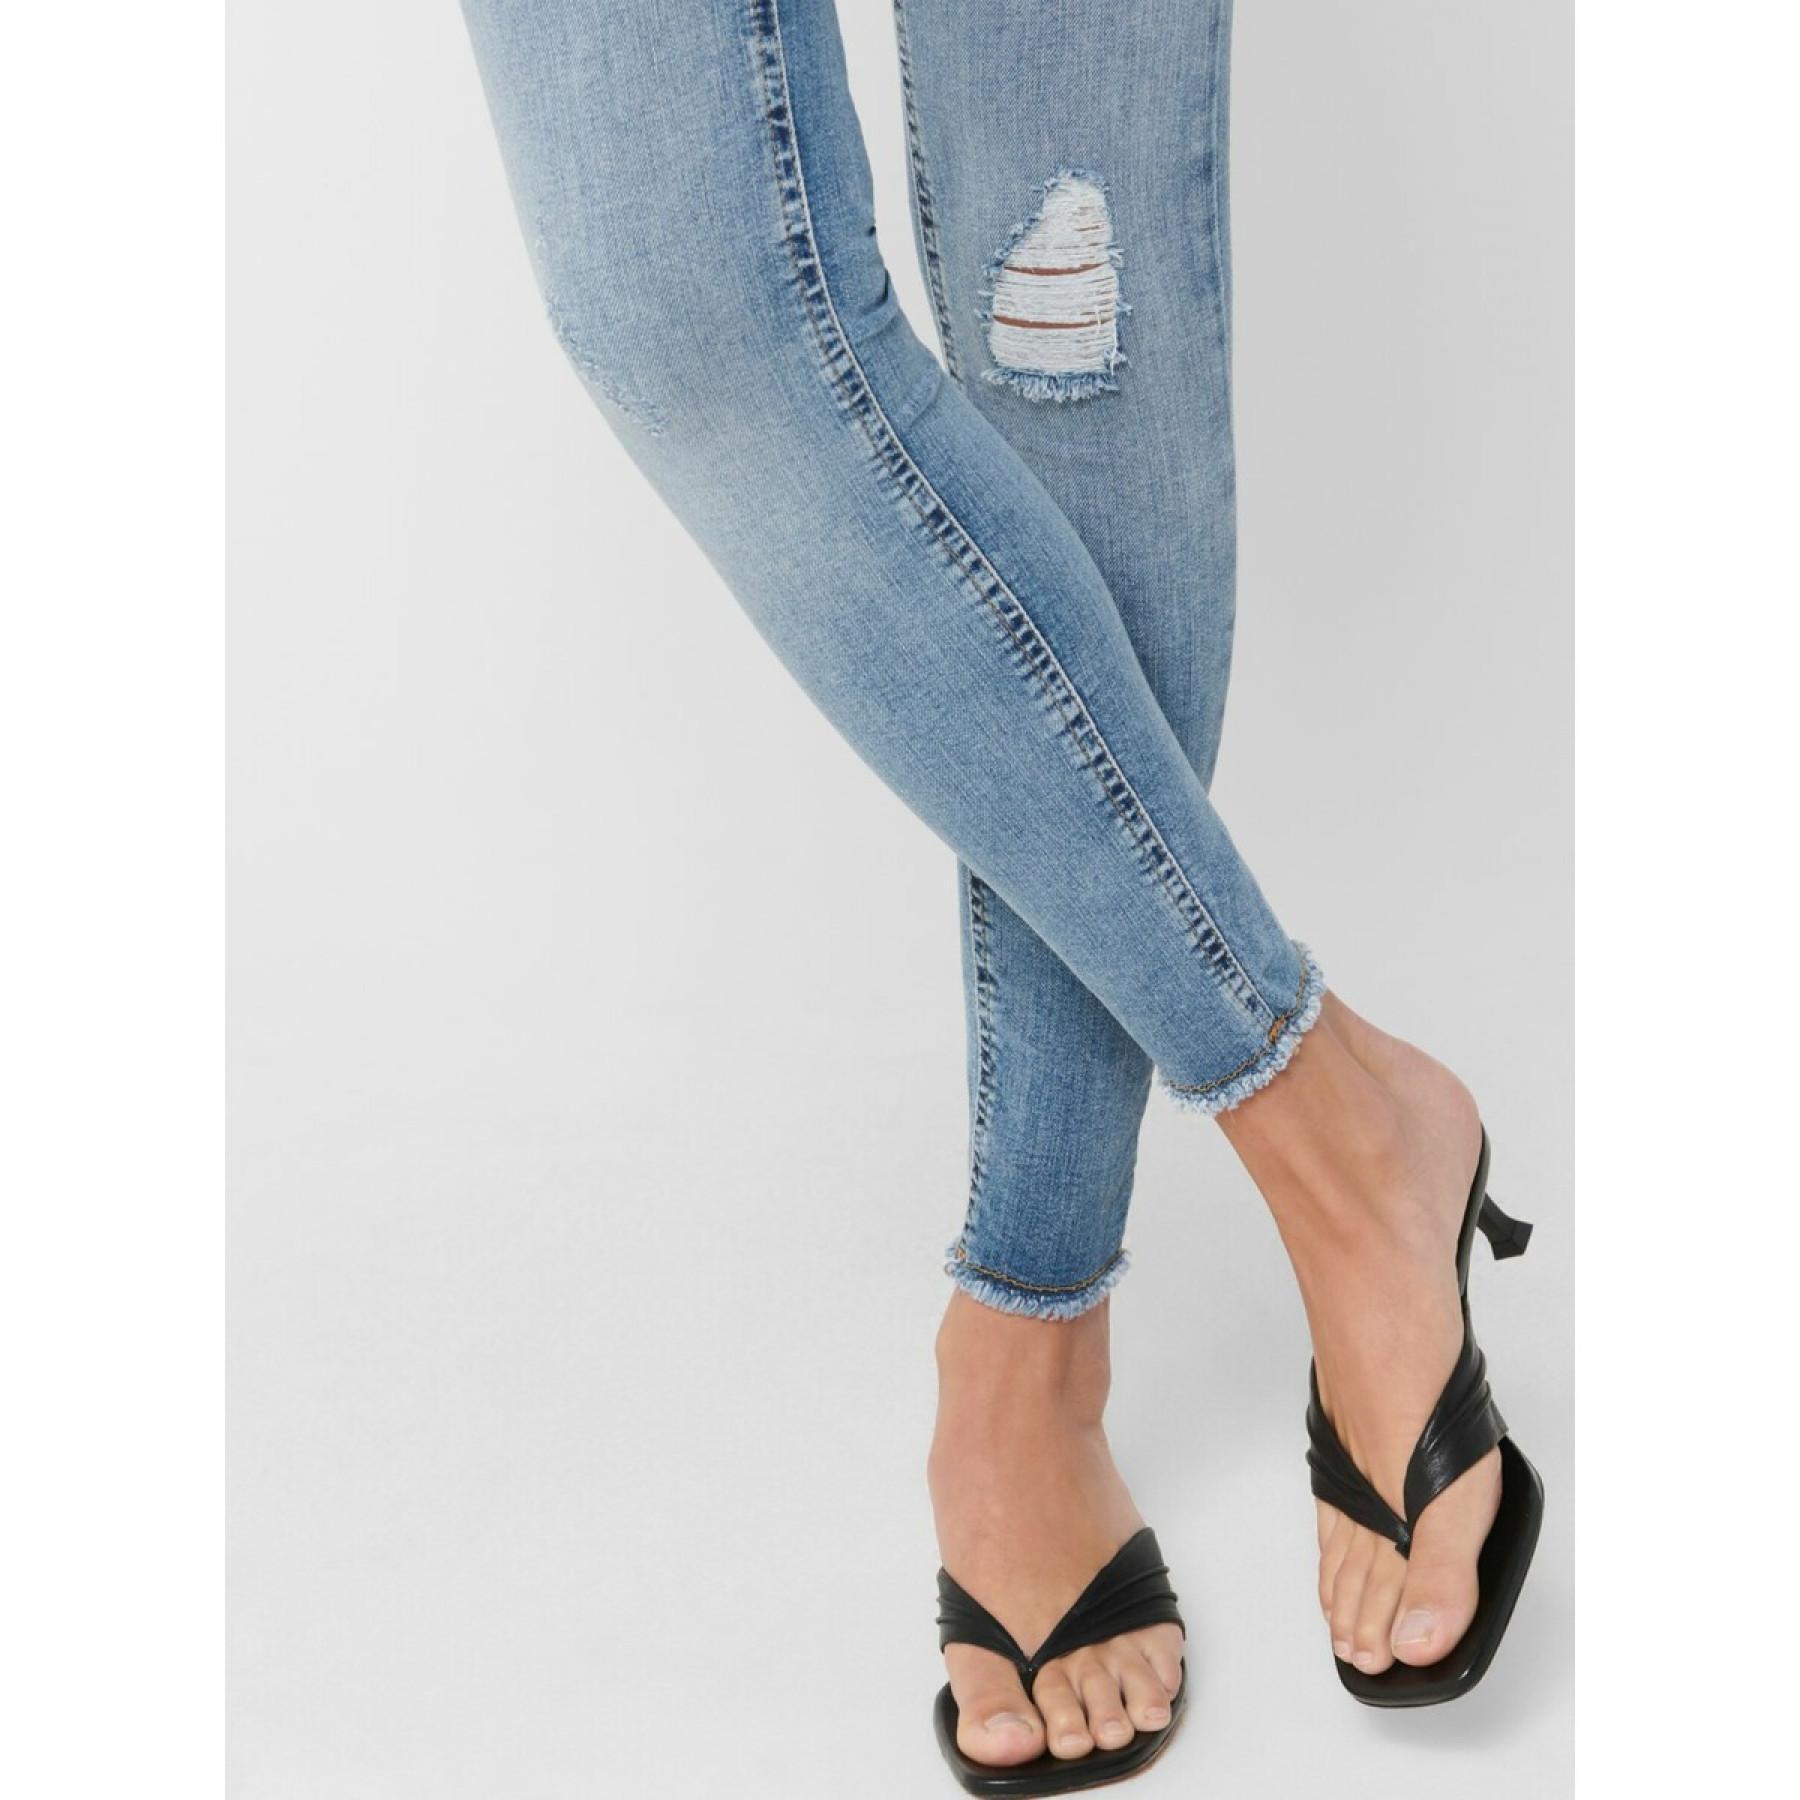 Women's jeans Only Blush life